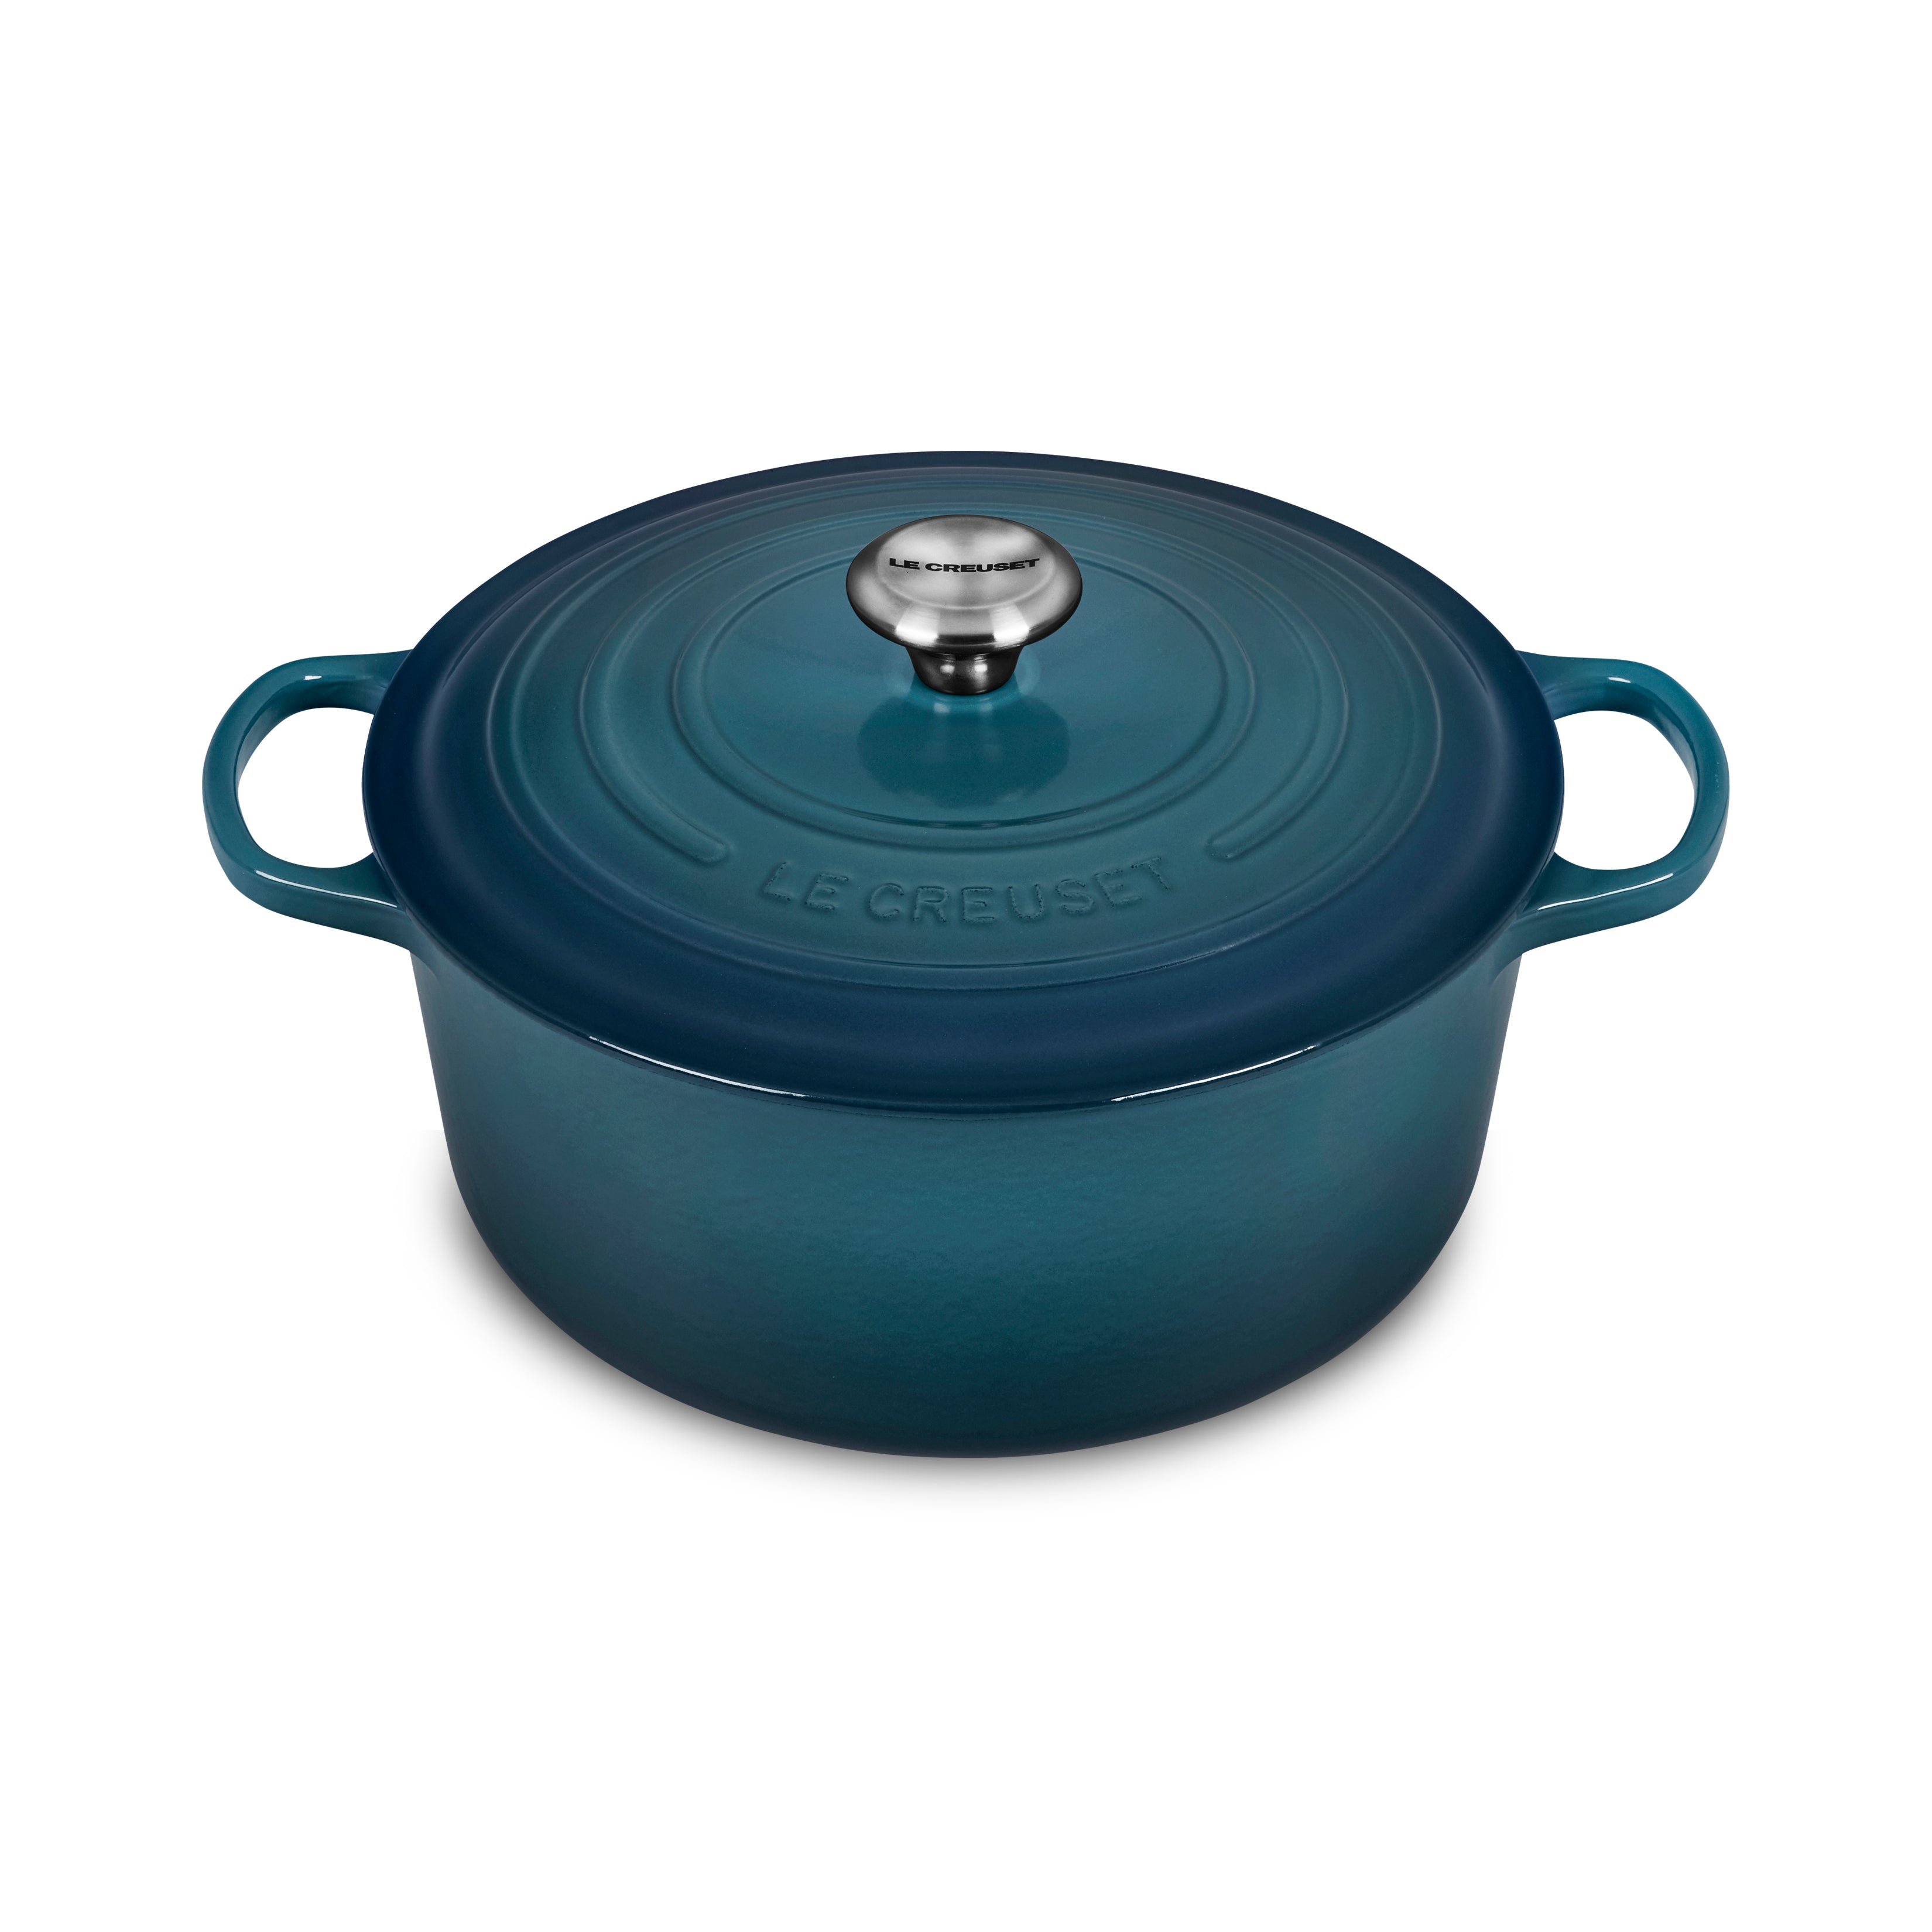 Dutch Oven Pot with Lid, Enameled Cast Iron Coated Dutch Oven Deep